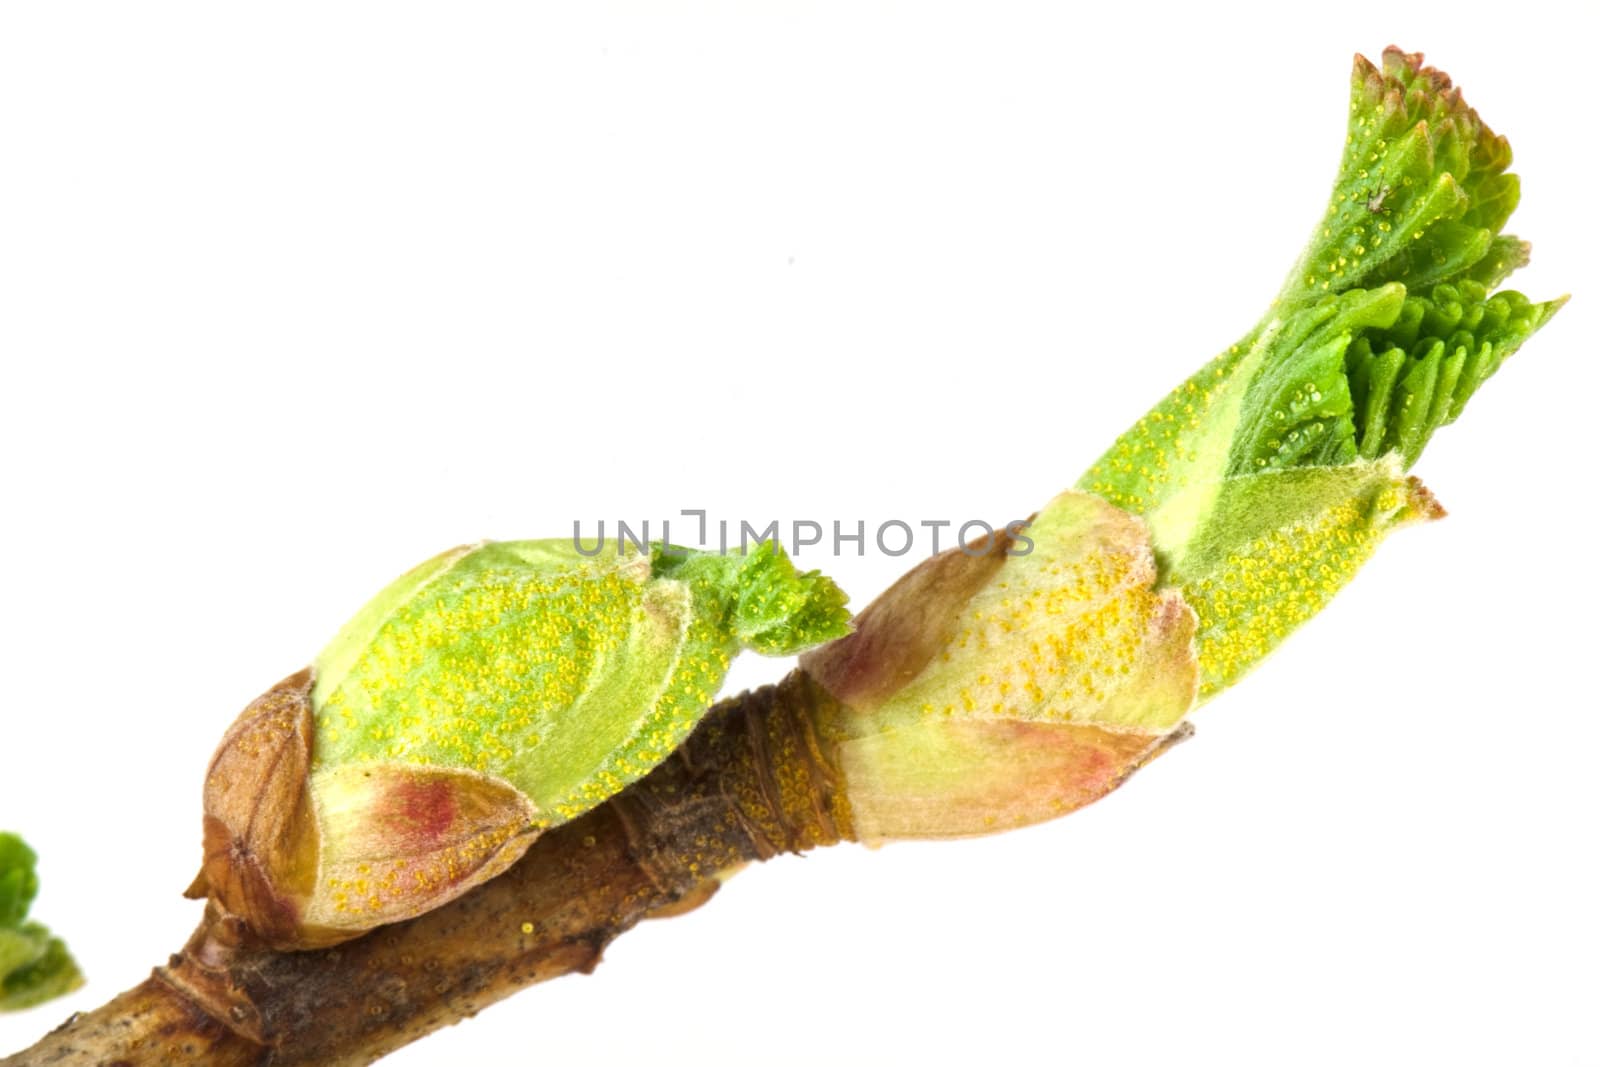 Currant buds isolated on white background